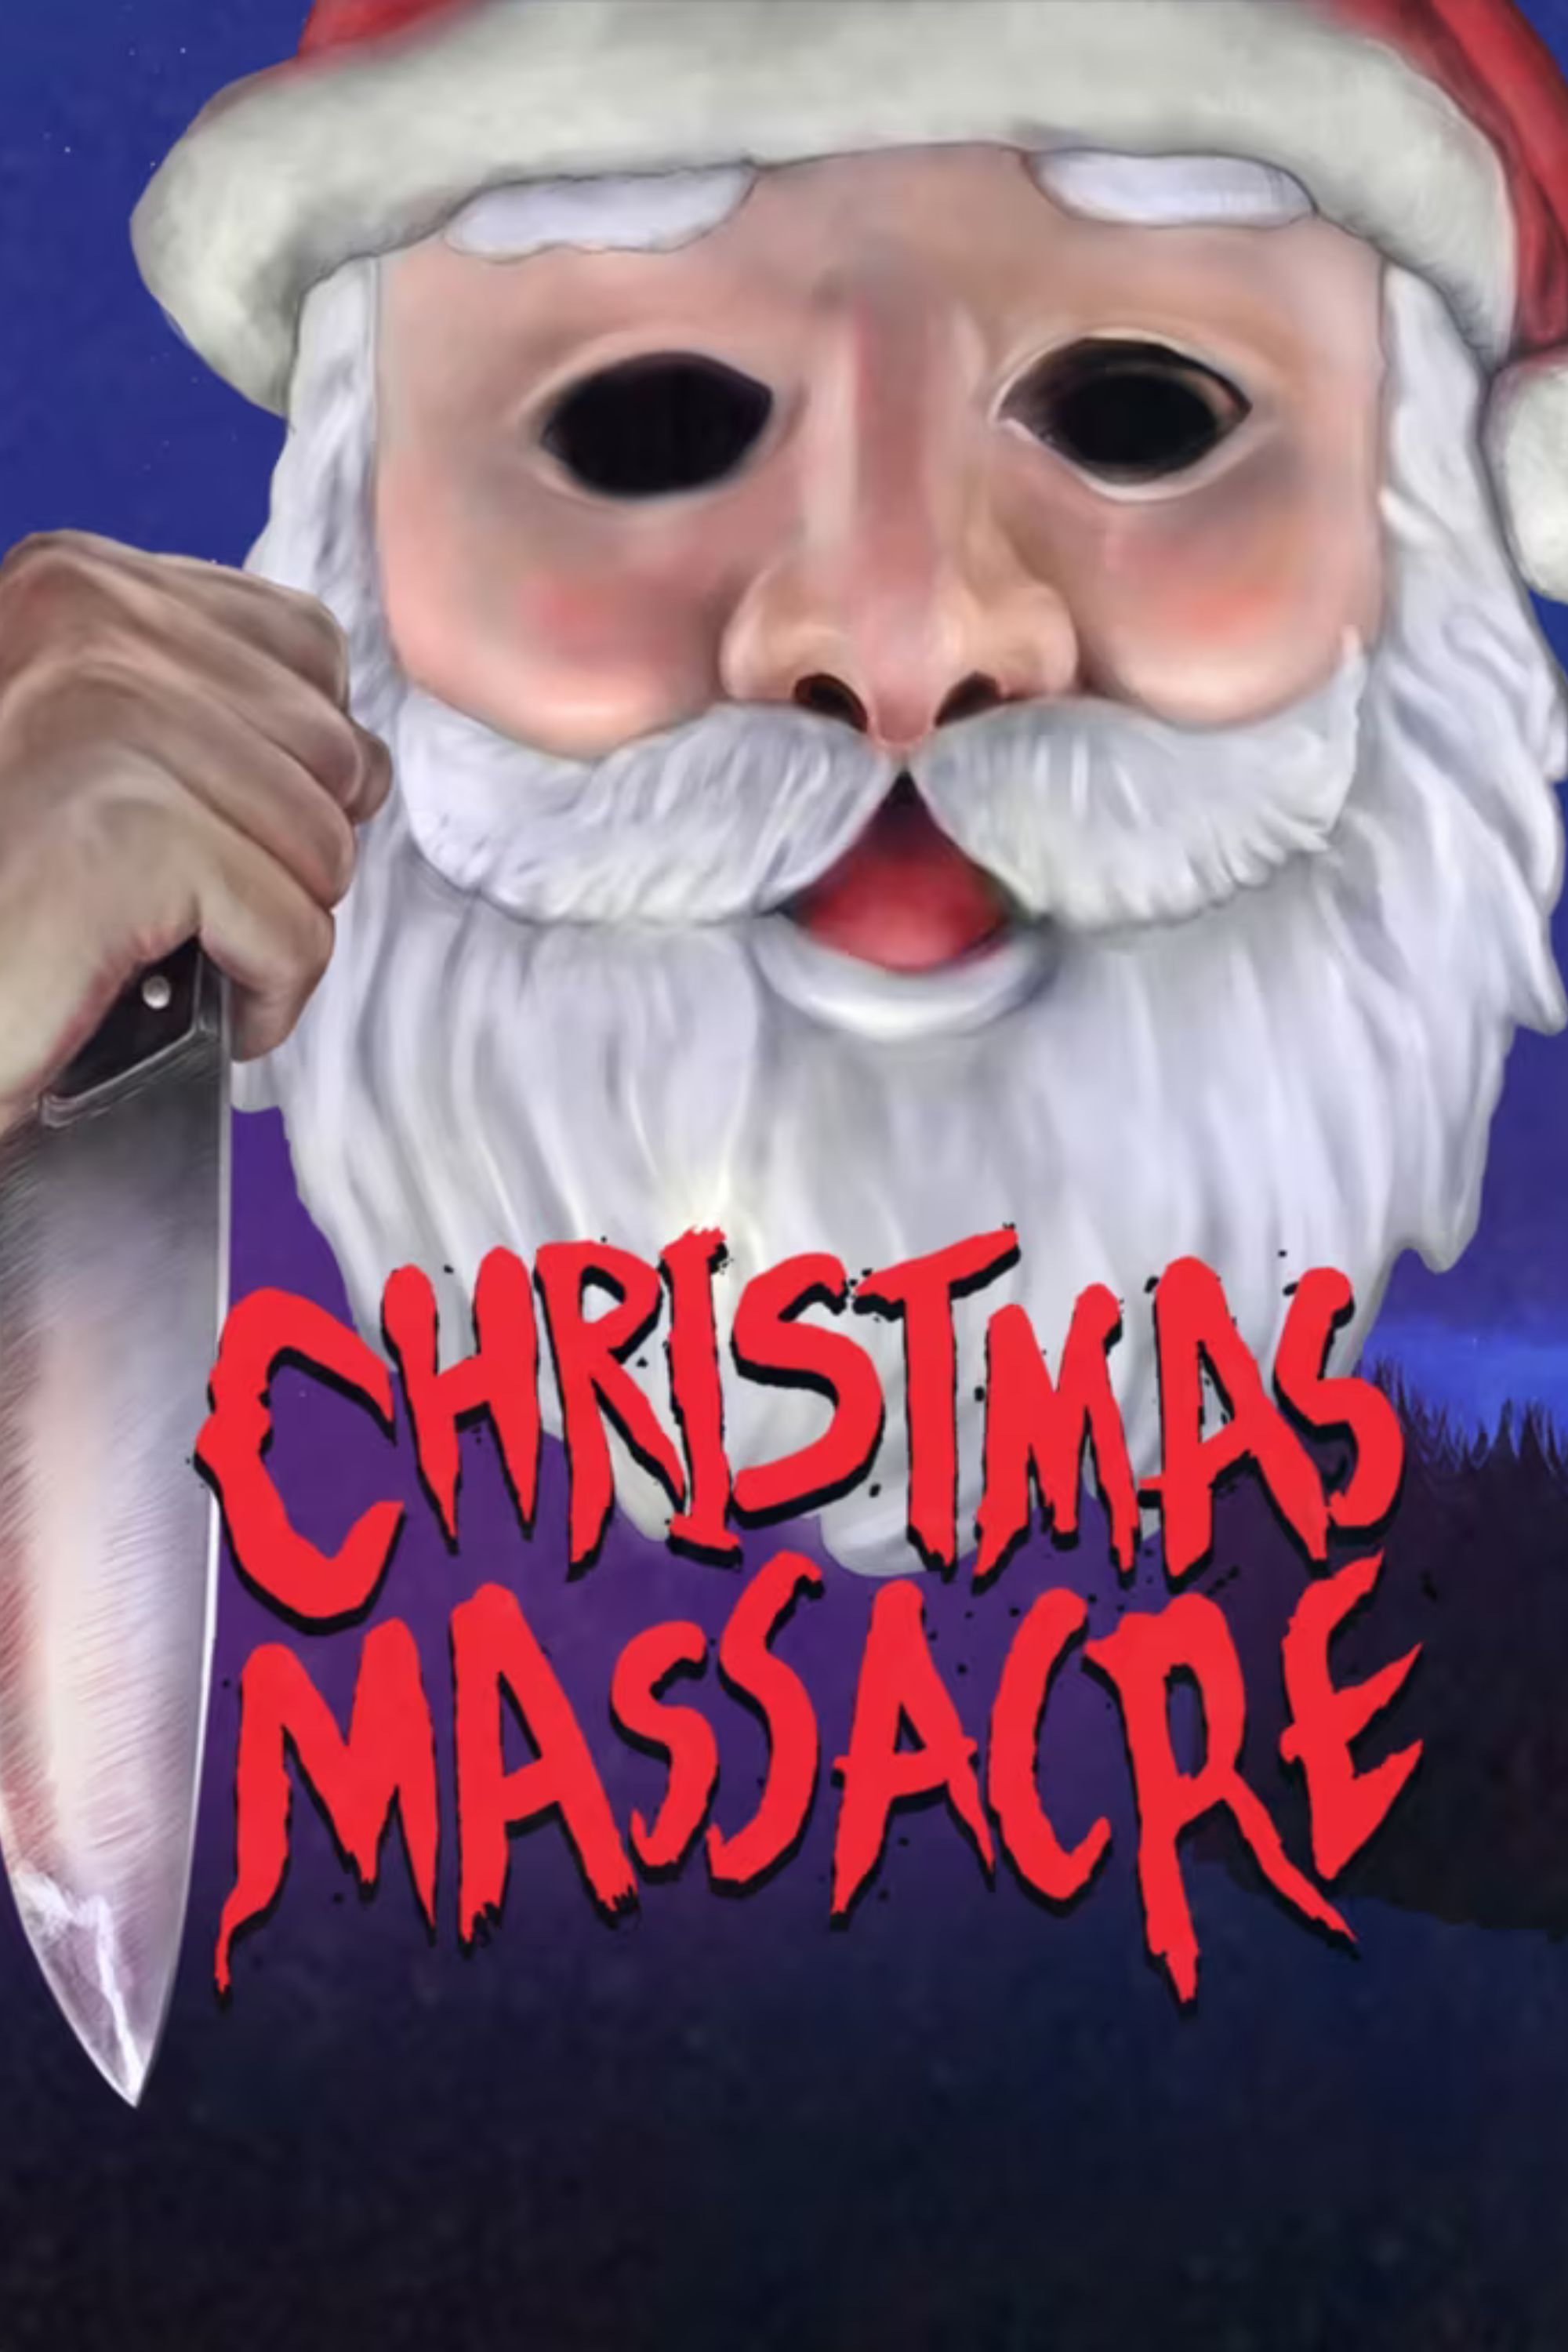 2000x3000 cover image for the Christmas Massacre video game showing an eye-less Santa holding a knife behind the game's logo